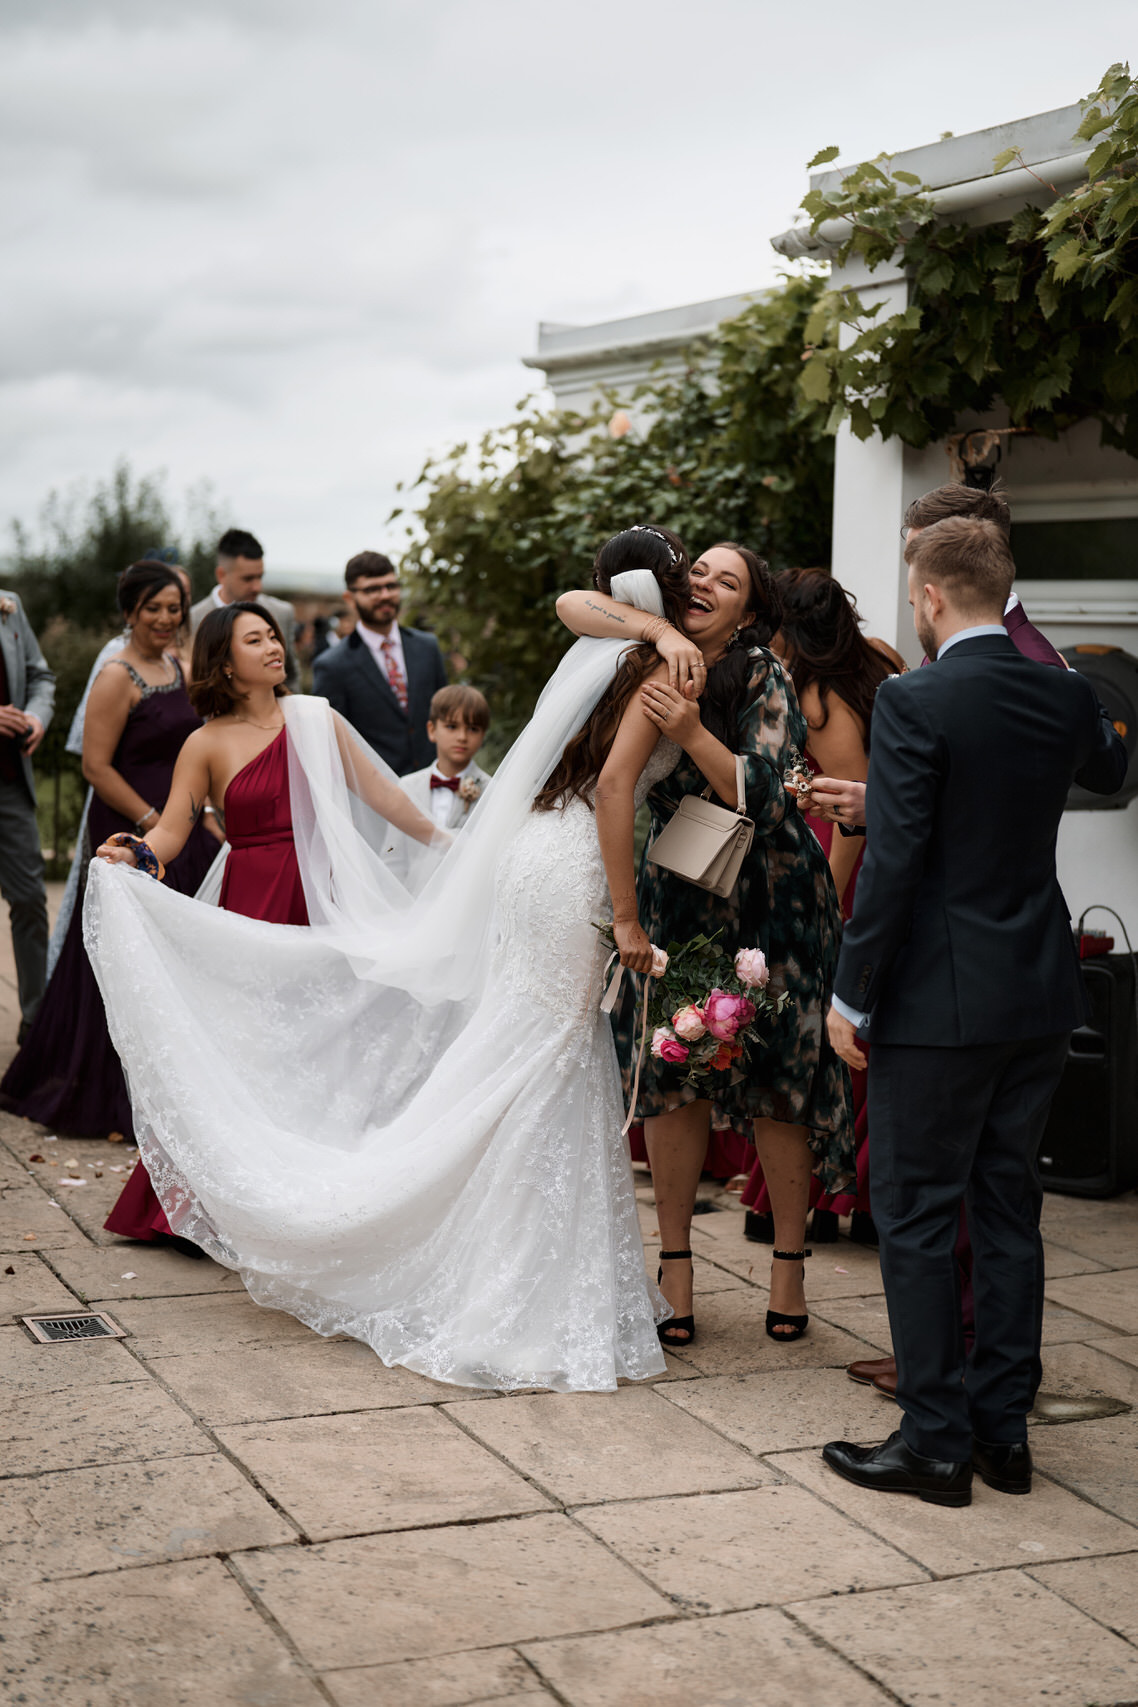 A bride and her bridesmaids are giving each other a hug in a courtyard.